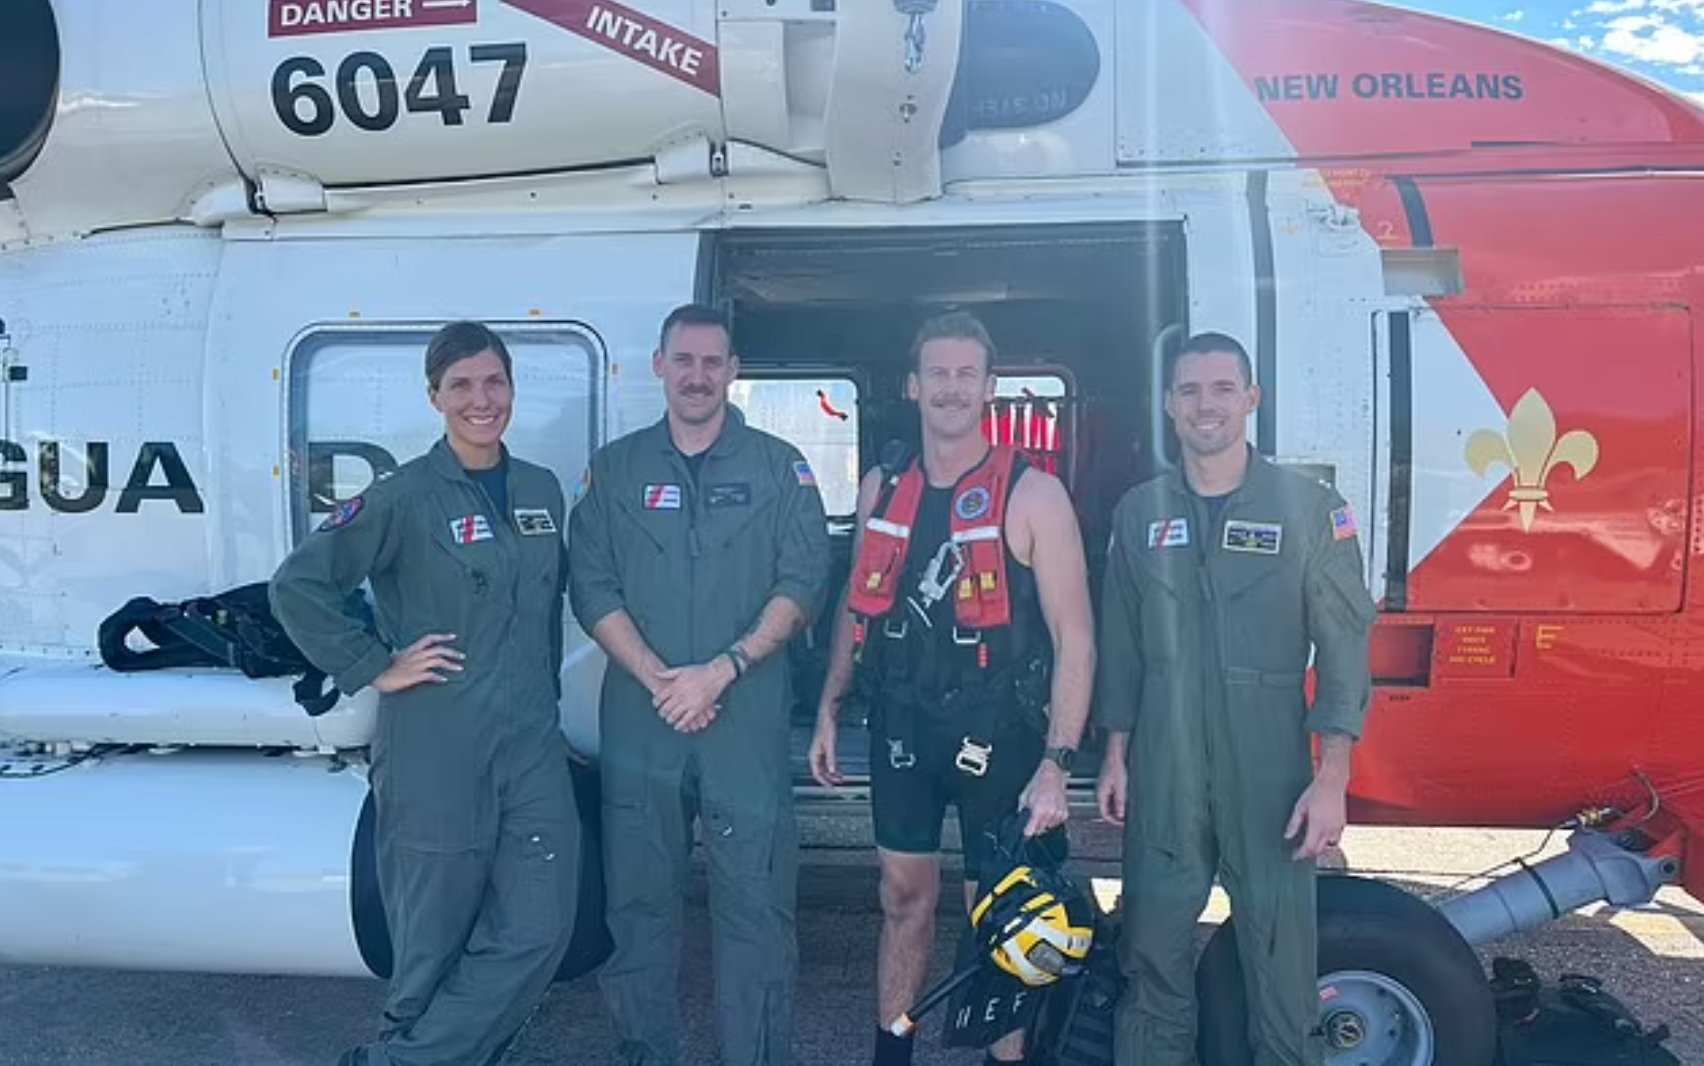 The US Coast Guard crew that rescued James Michael Grimes, 28, after he fell off a cruise ship the night before Thanksgiving. From left Lt Katy Caraway, AMT2 Dalton Goetsch, Aviation Survival Technician 2nd Class Richard ‘Dicky’ Hoefle, and Lt Travis Rhea.